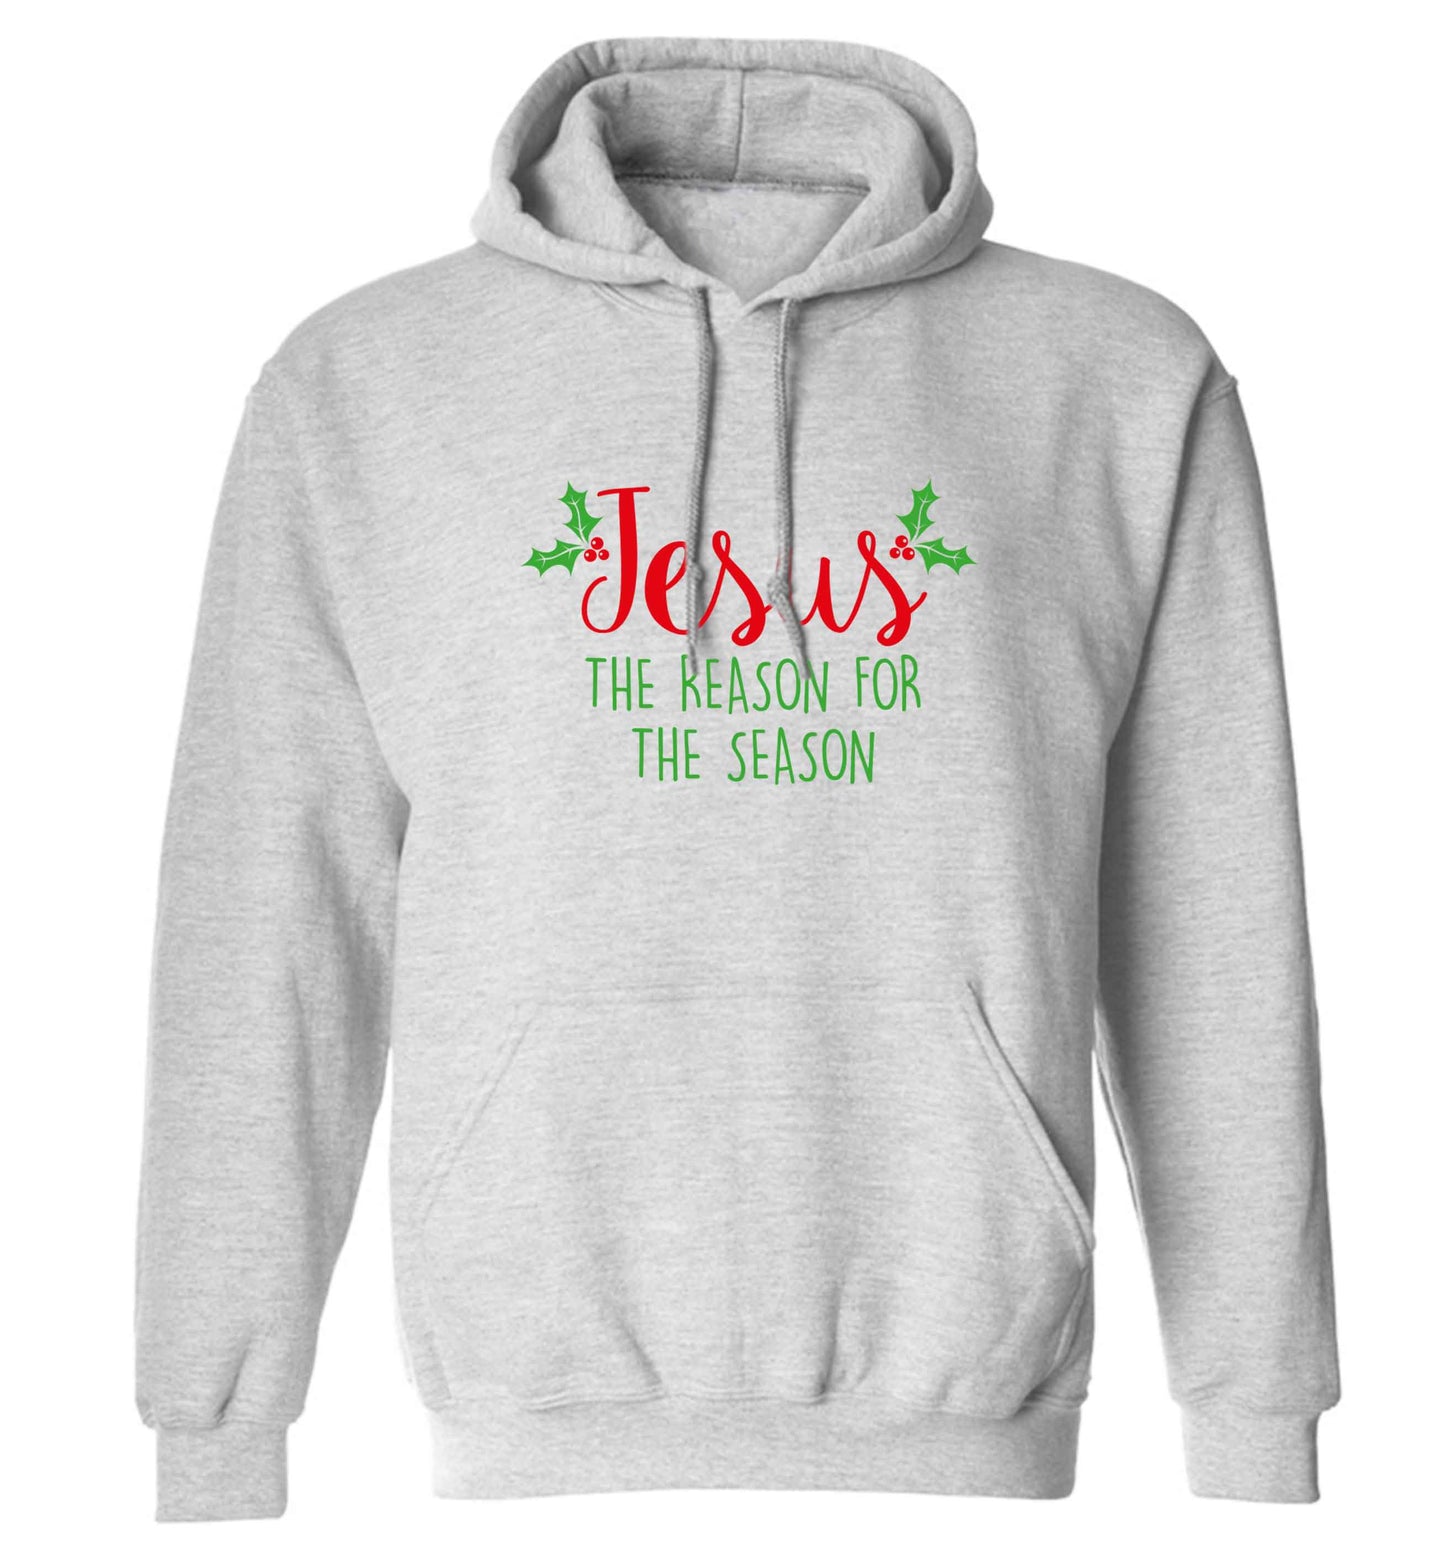 Jesus the reason for the season adults unisex grey hoodie 2XL